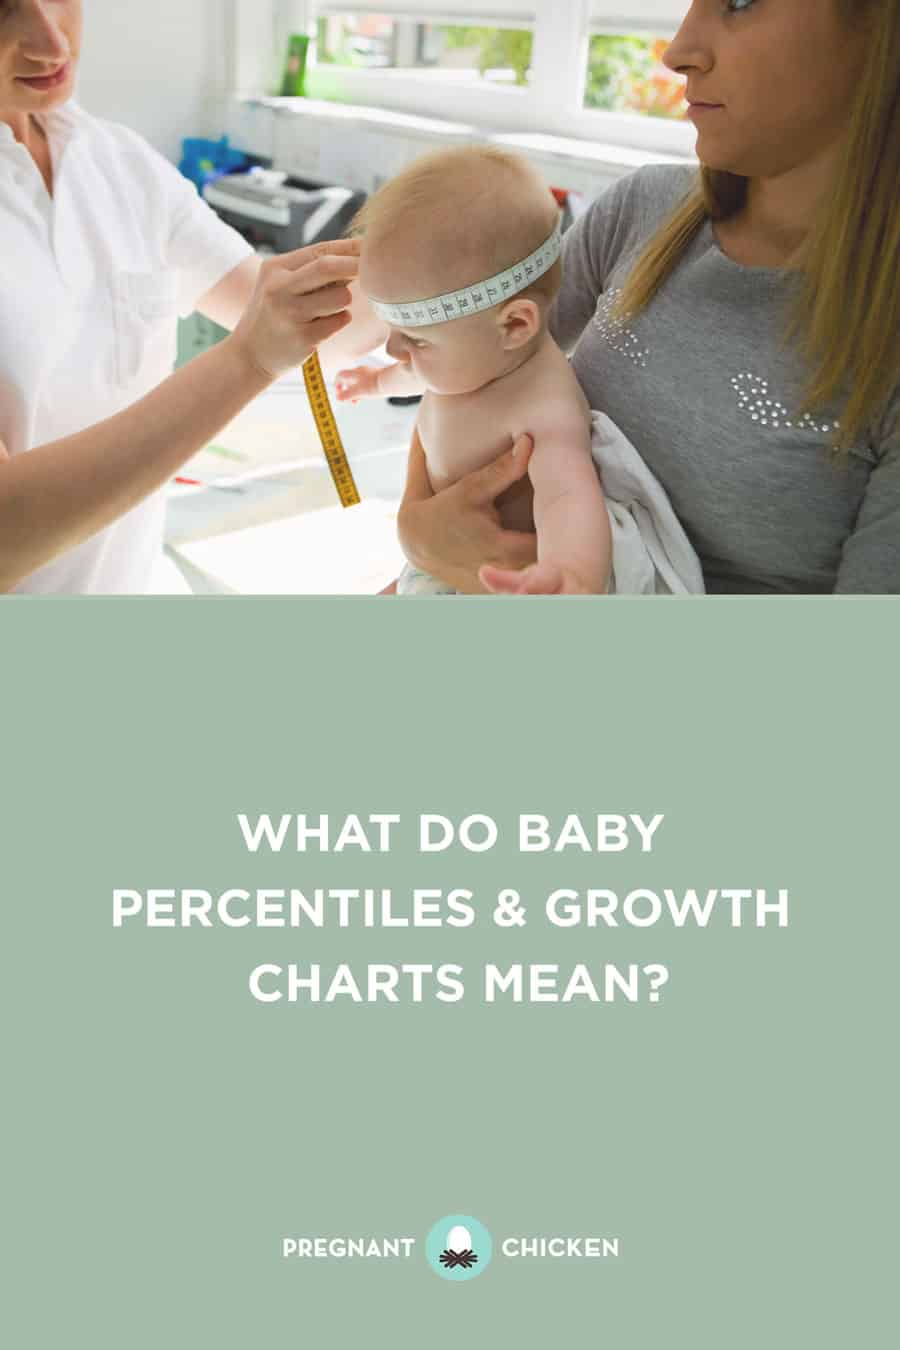 Baby's growth chart can be really confusing. We've got your back! Here's a cheat sheet with everything you need to know about the weight and height percentiles and tracking your newborn's growth. #babygrowth #infantgrowth #growthchart